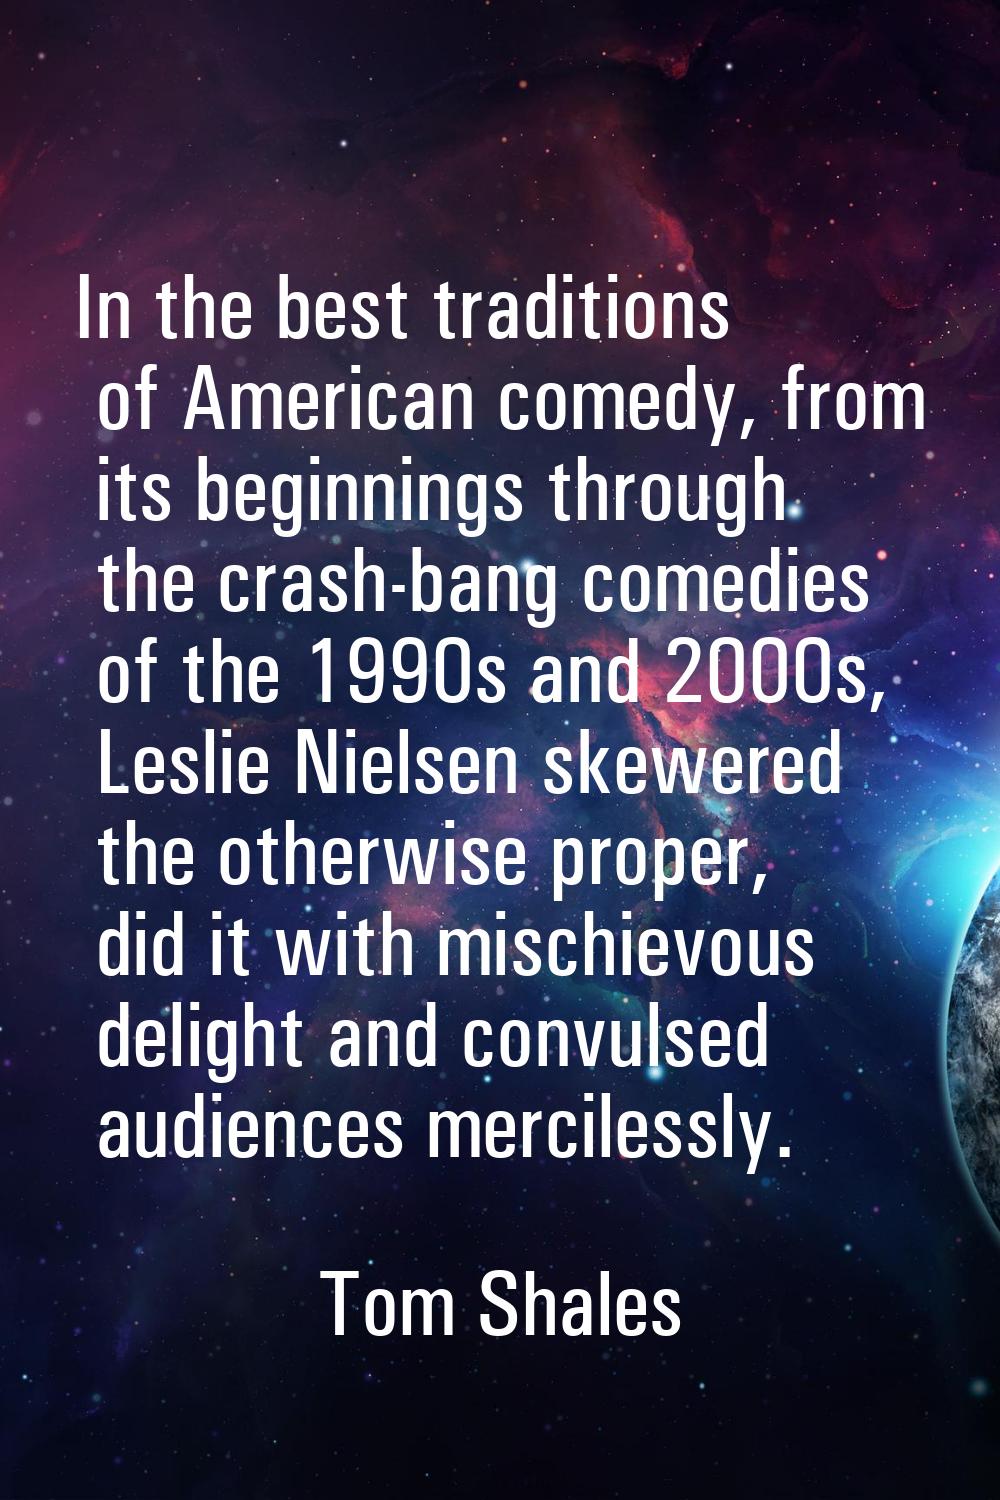 In the best traditions of American comedy, from its beginnings through the crash-bang comedies of t